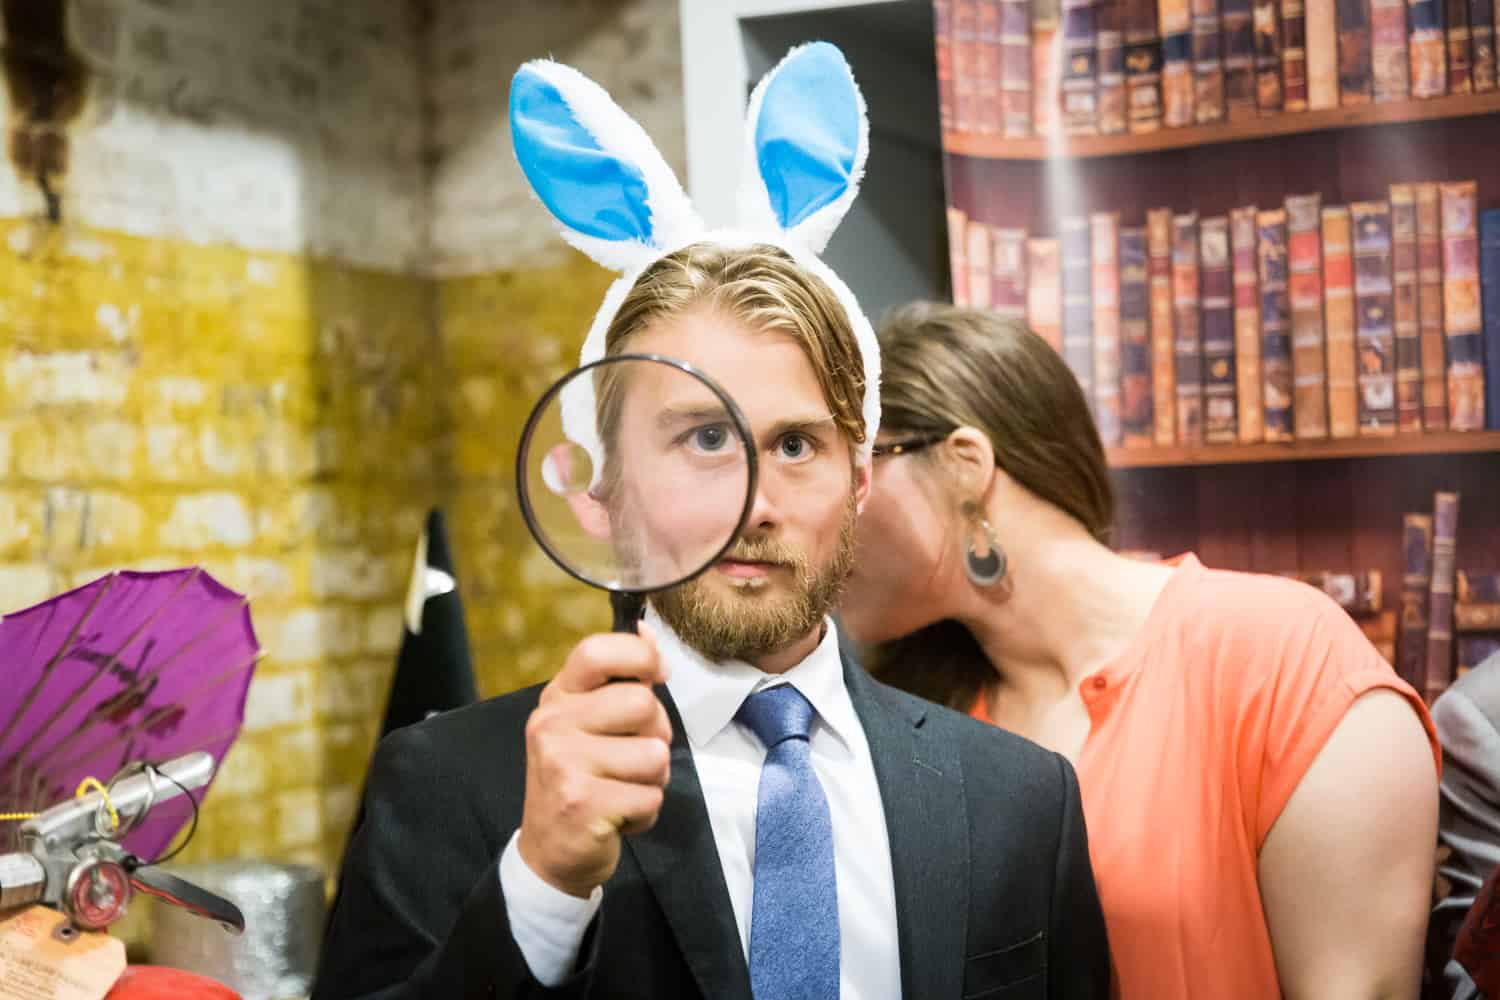 Man wearing bunny ears and holding a magnifying glass in a DIY photobooth